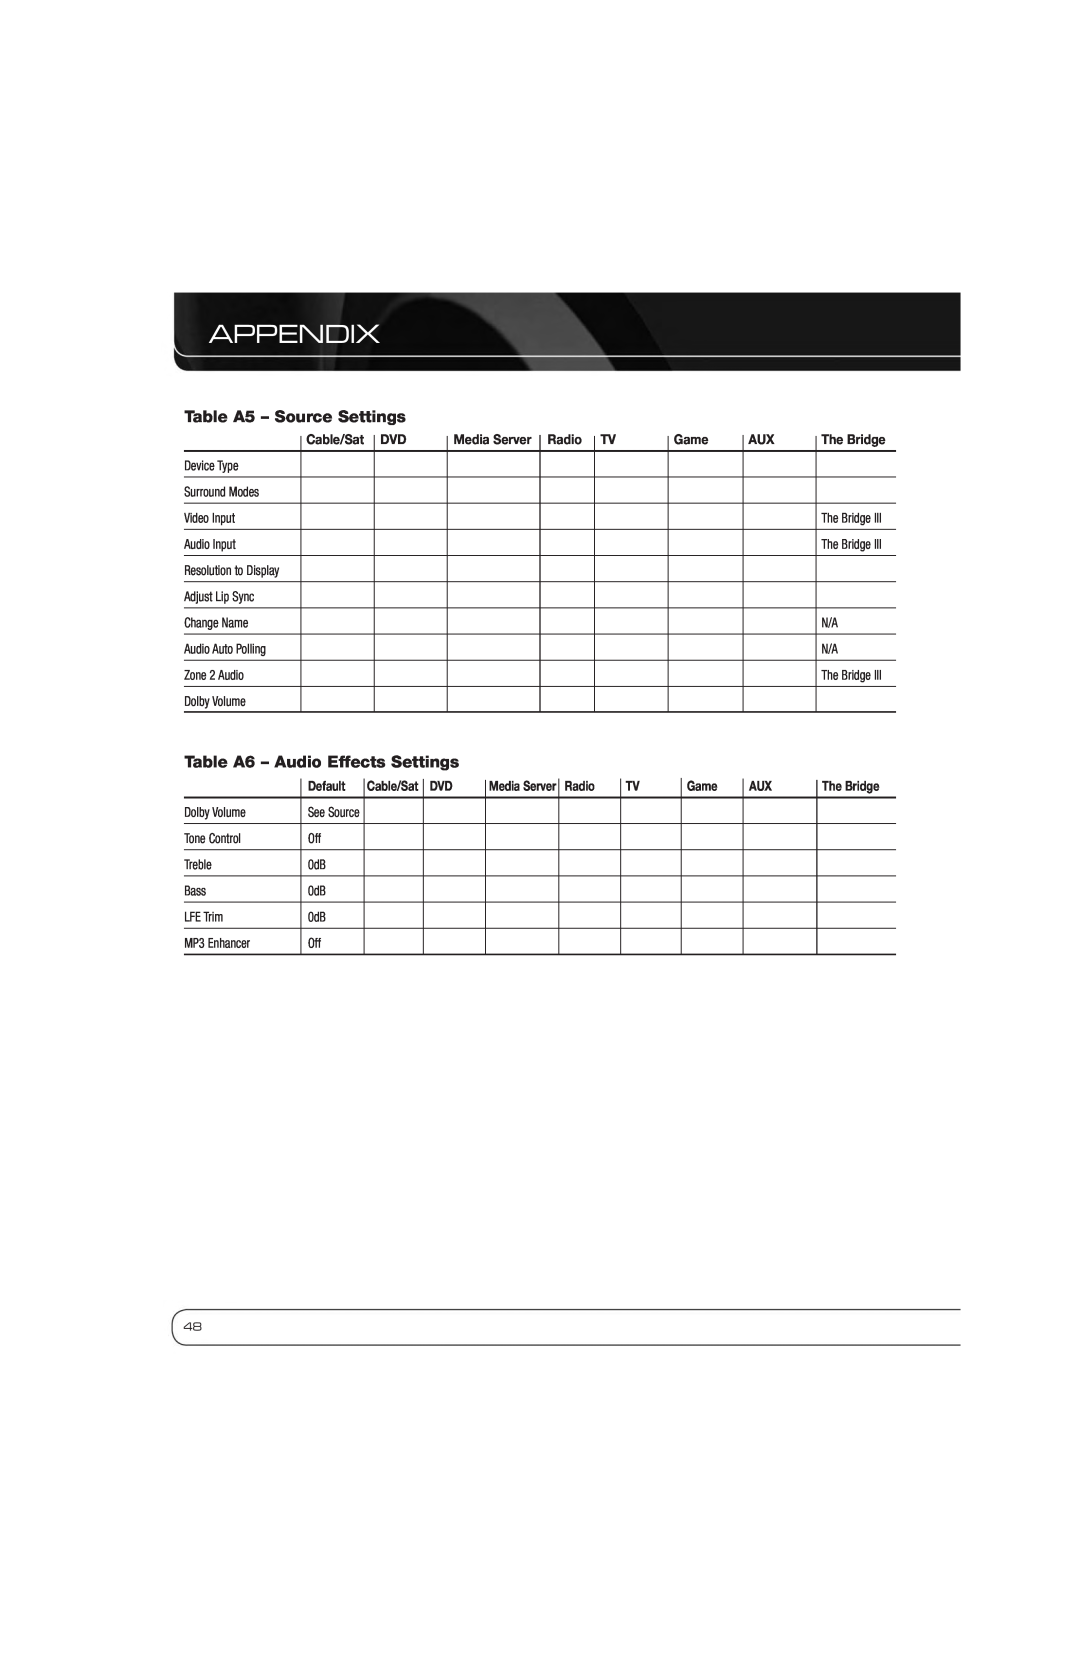 Harman AVR 2600 owner manual Table A5 - Source Settings, Table A6 - Audio Effects Settings, Appendix 